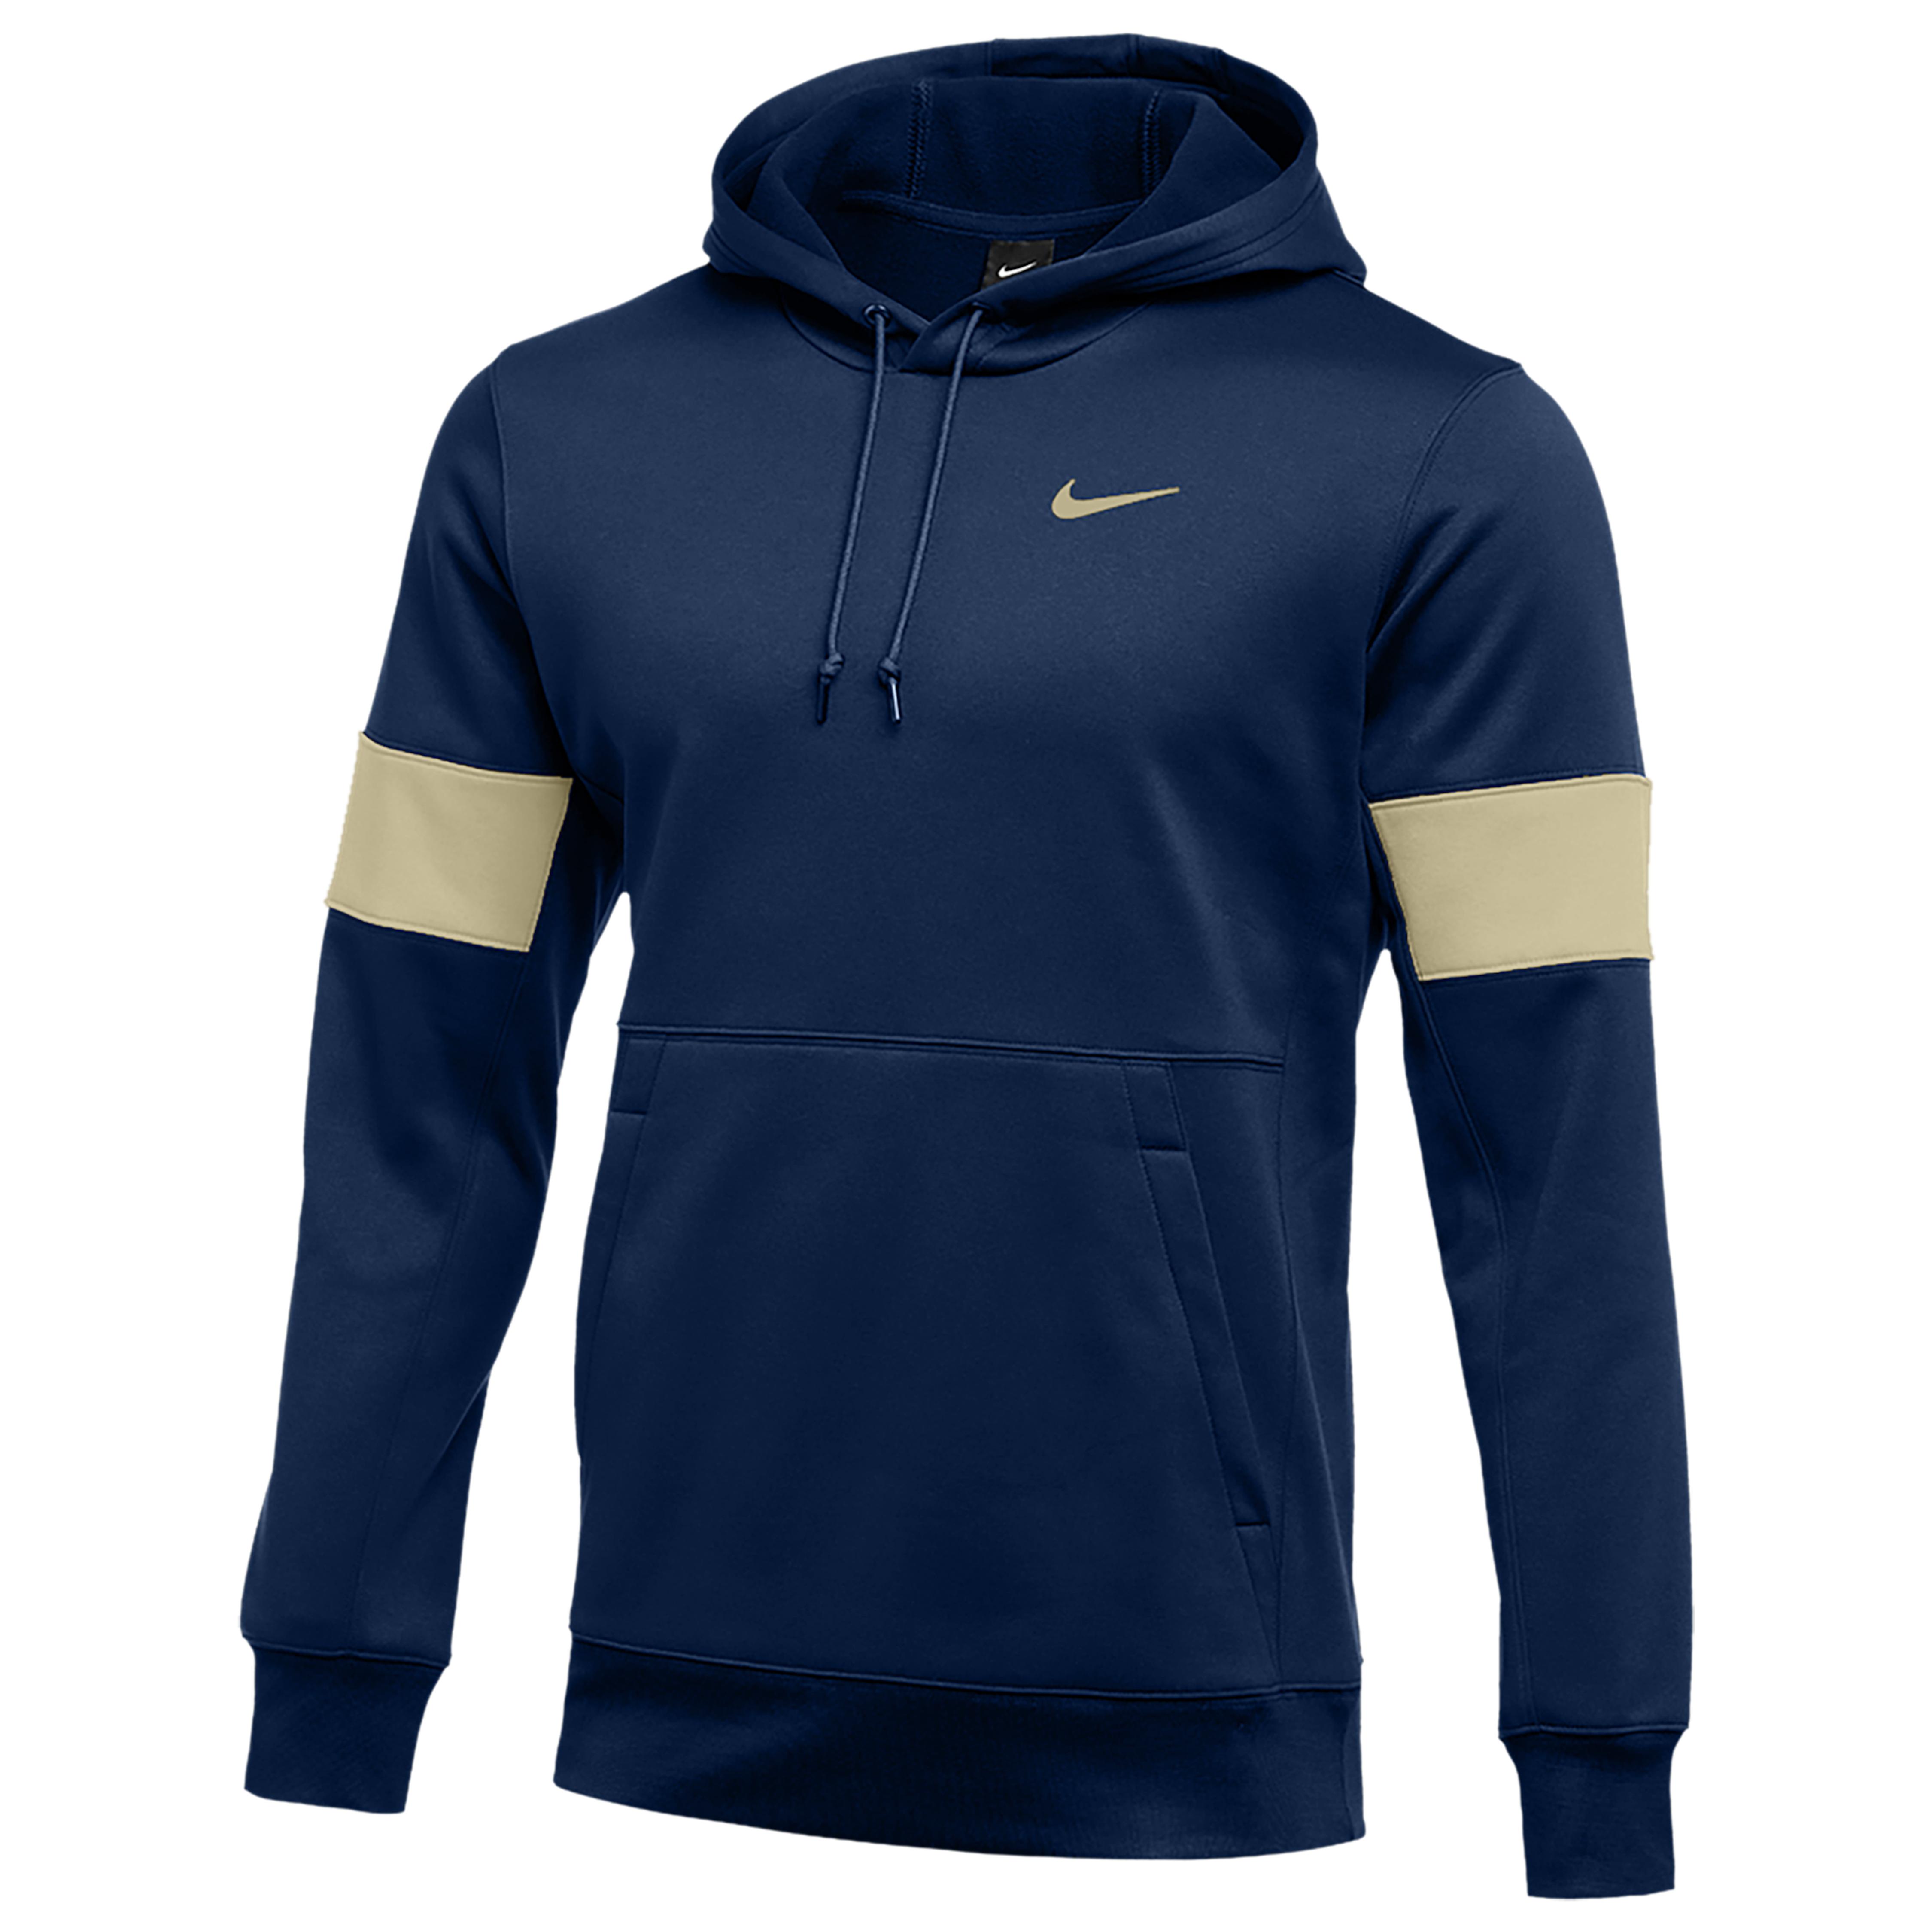 Nike Fleece Team Authentic Therma Pullover Hoodie in Blue for Men - Lyst